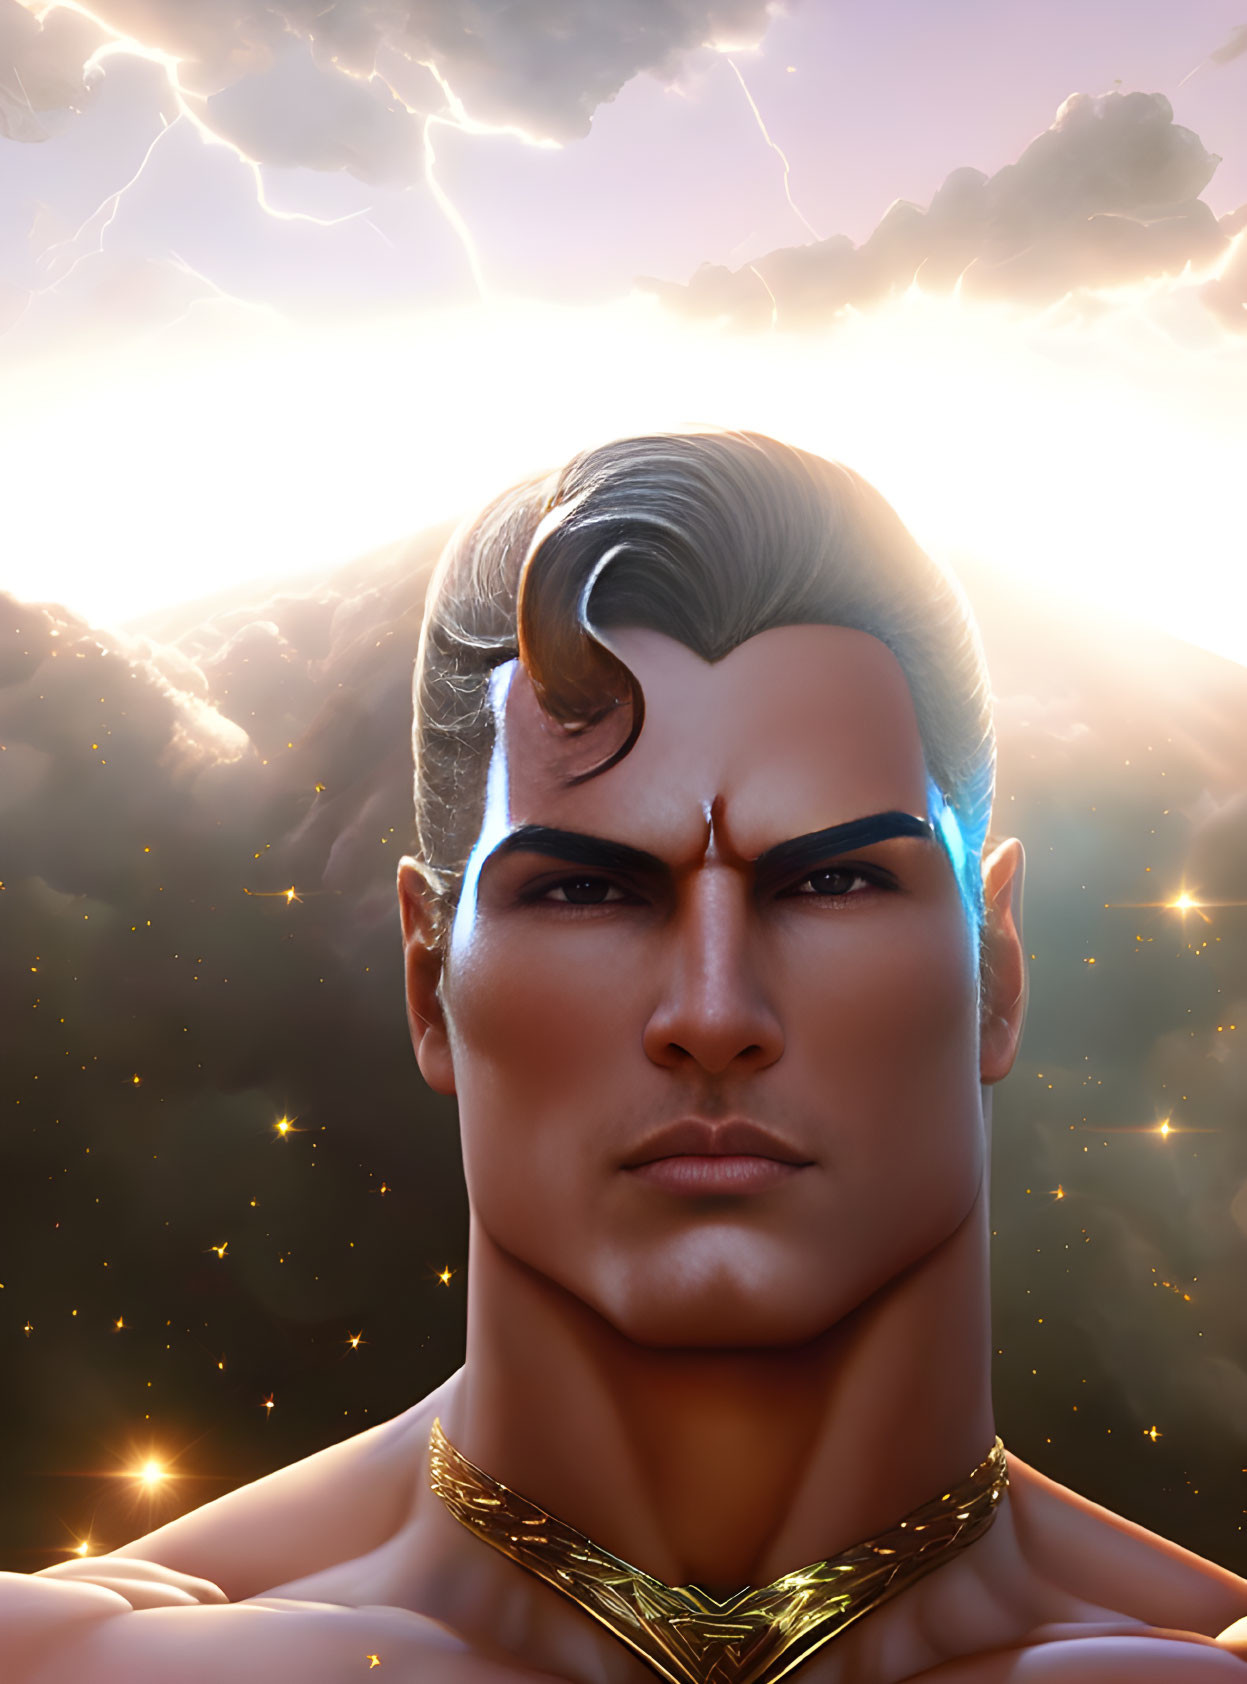 Male character portrait against dramatic sky with lightning and glowing particles